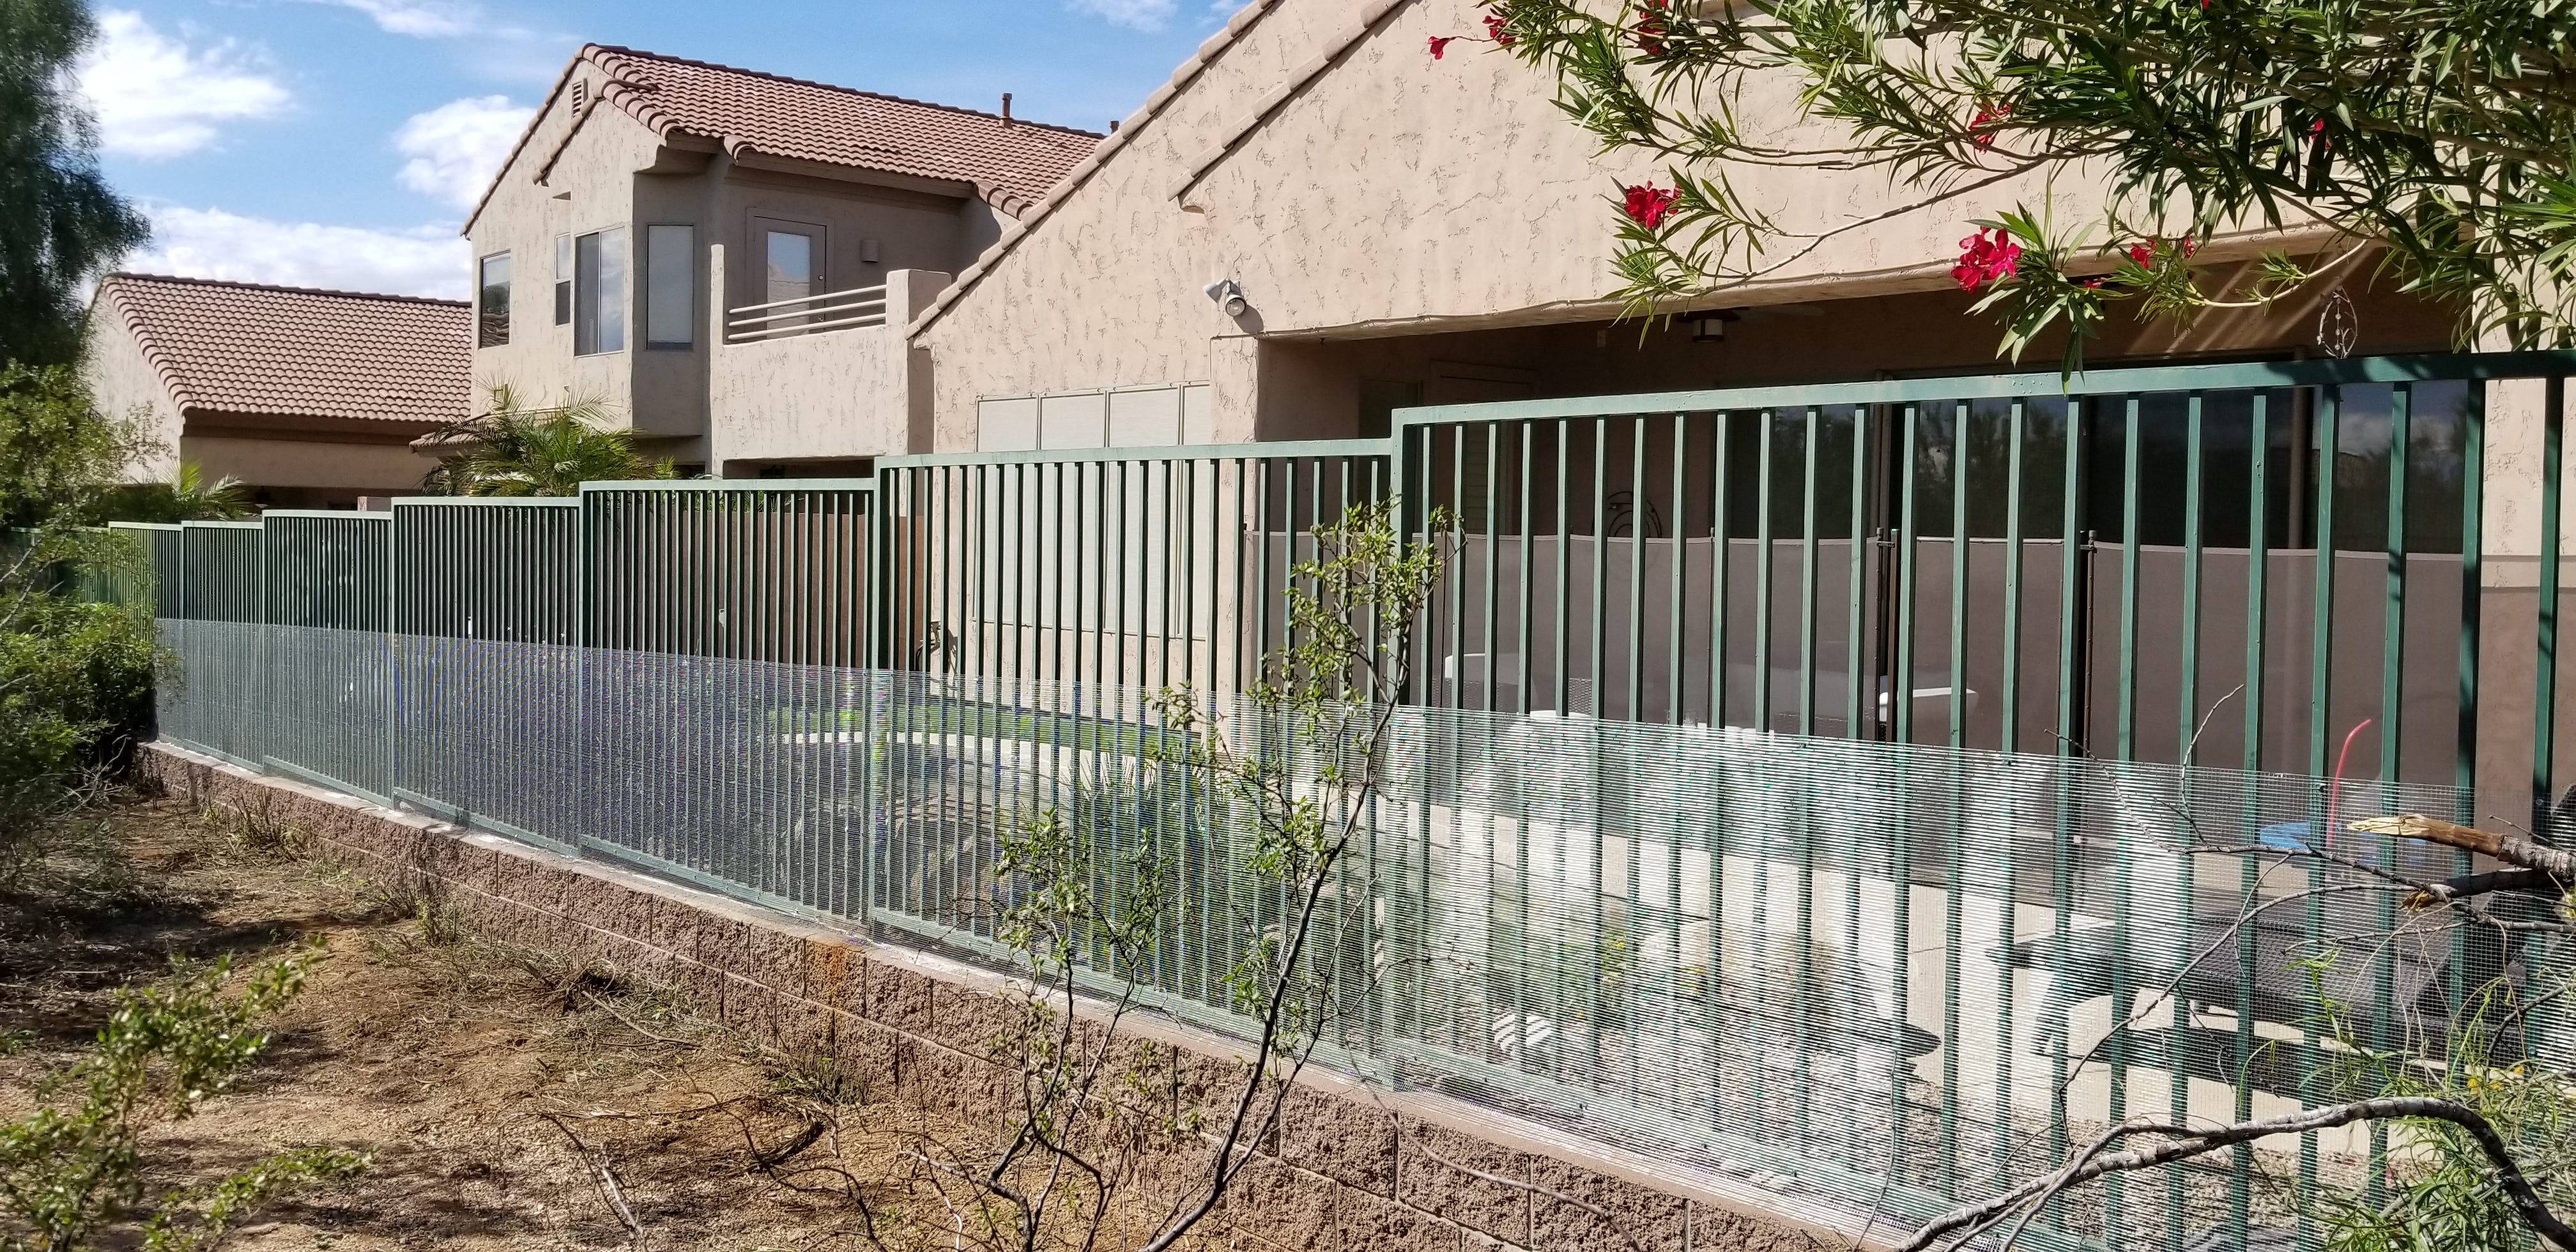 10 Important Things to Look for in a Rattlesnake Fence Provider — The Definitive Buyers Guide to Snake Fencing by Bryan D